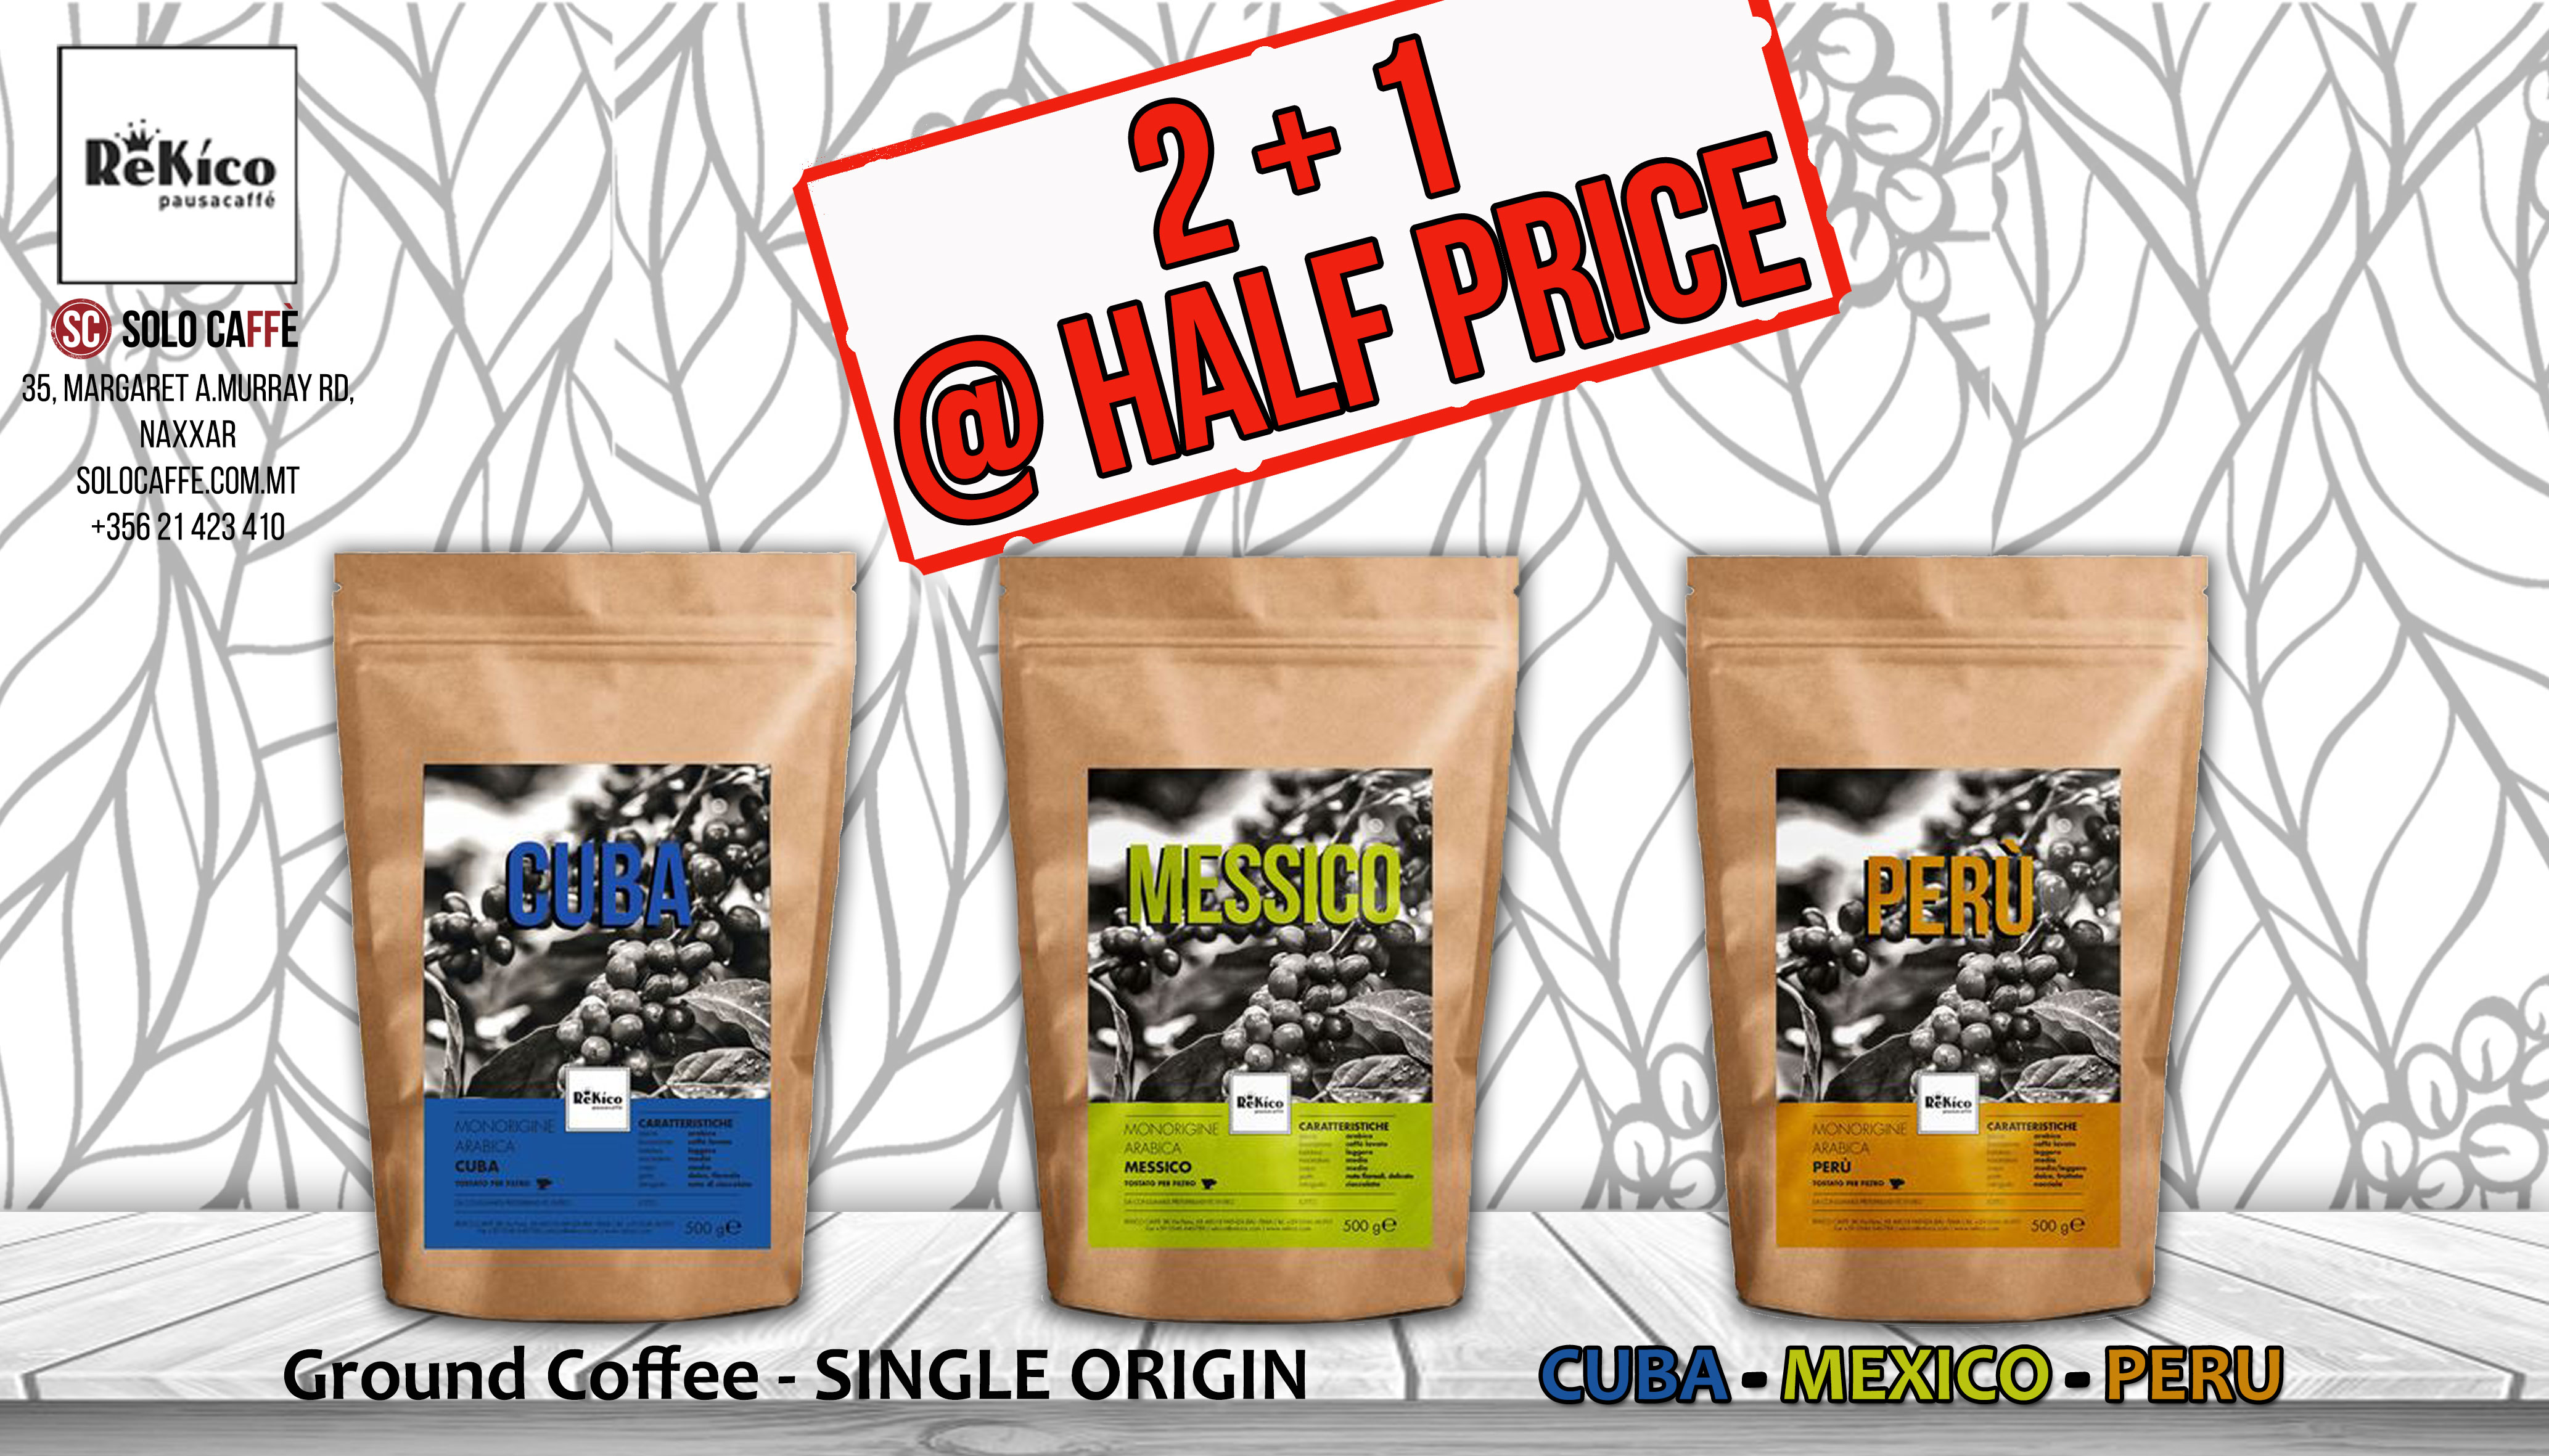 Caffe' Rekico single origin PROMO. Buy 2 and get the 3rd at HALF PRICE! Let us know your preferred blends in the 'notes' section.